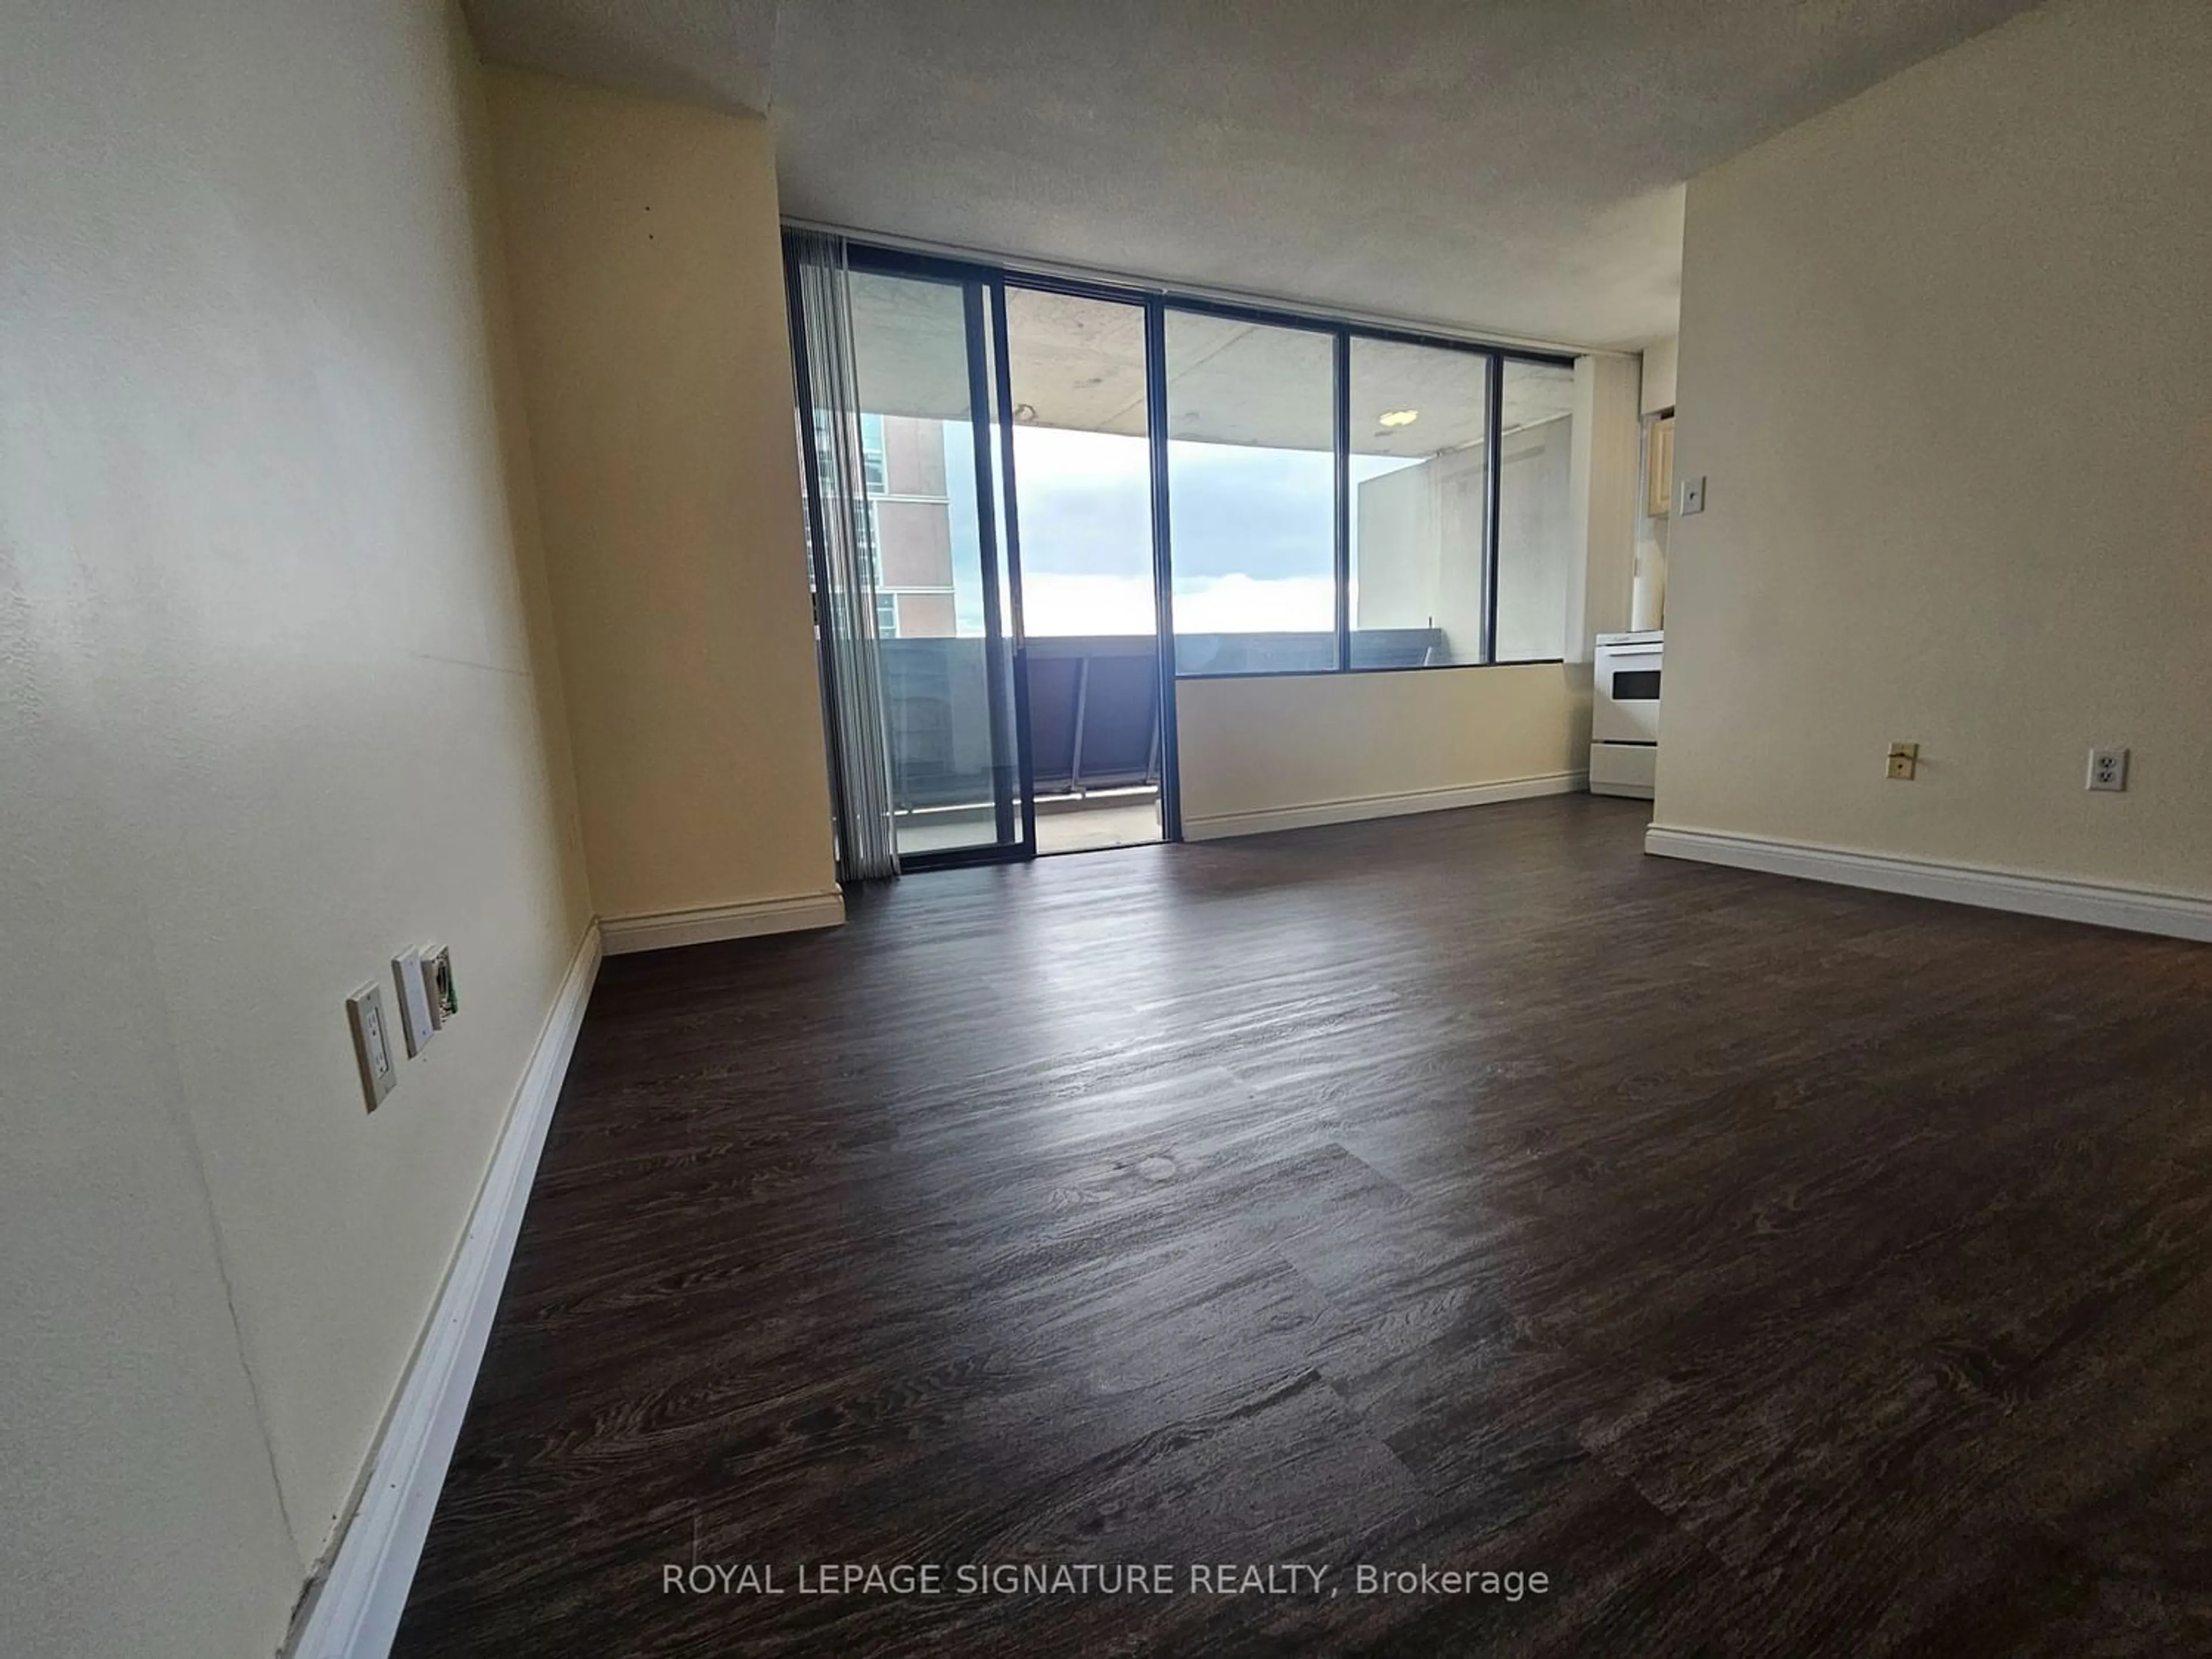 A pic of a room for 720 Spadina Ave #803, Toronto Ontario M5S 2T9